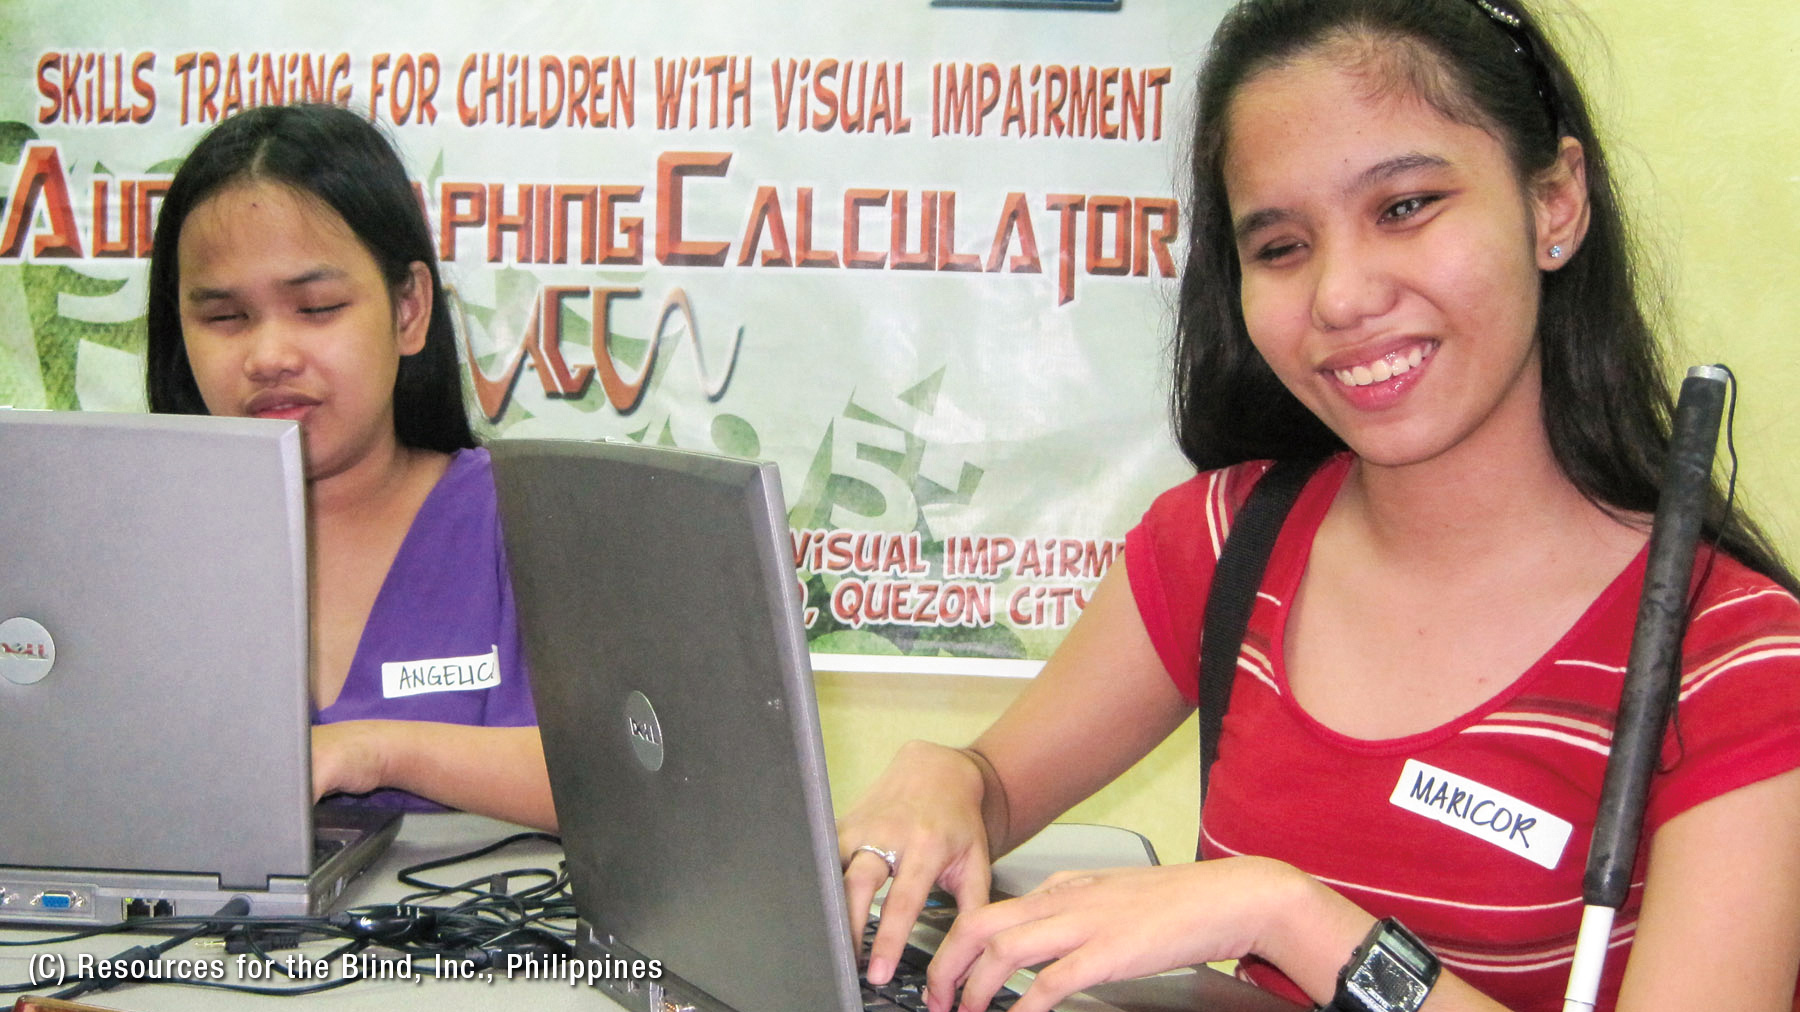 Photo of visually impaired women learning through the use of ICT. (C) Resources for the Blind, Inc., Philippines